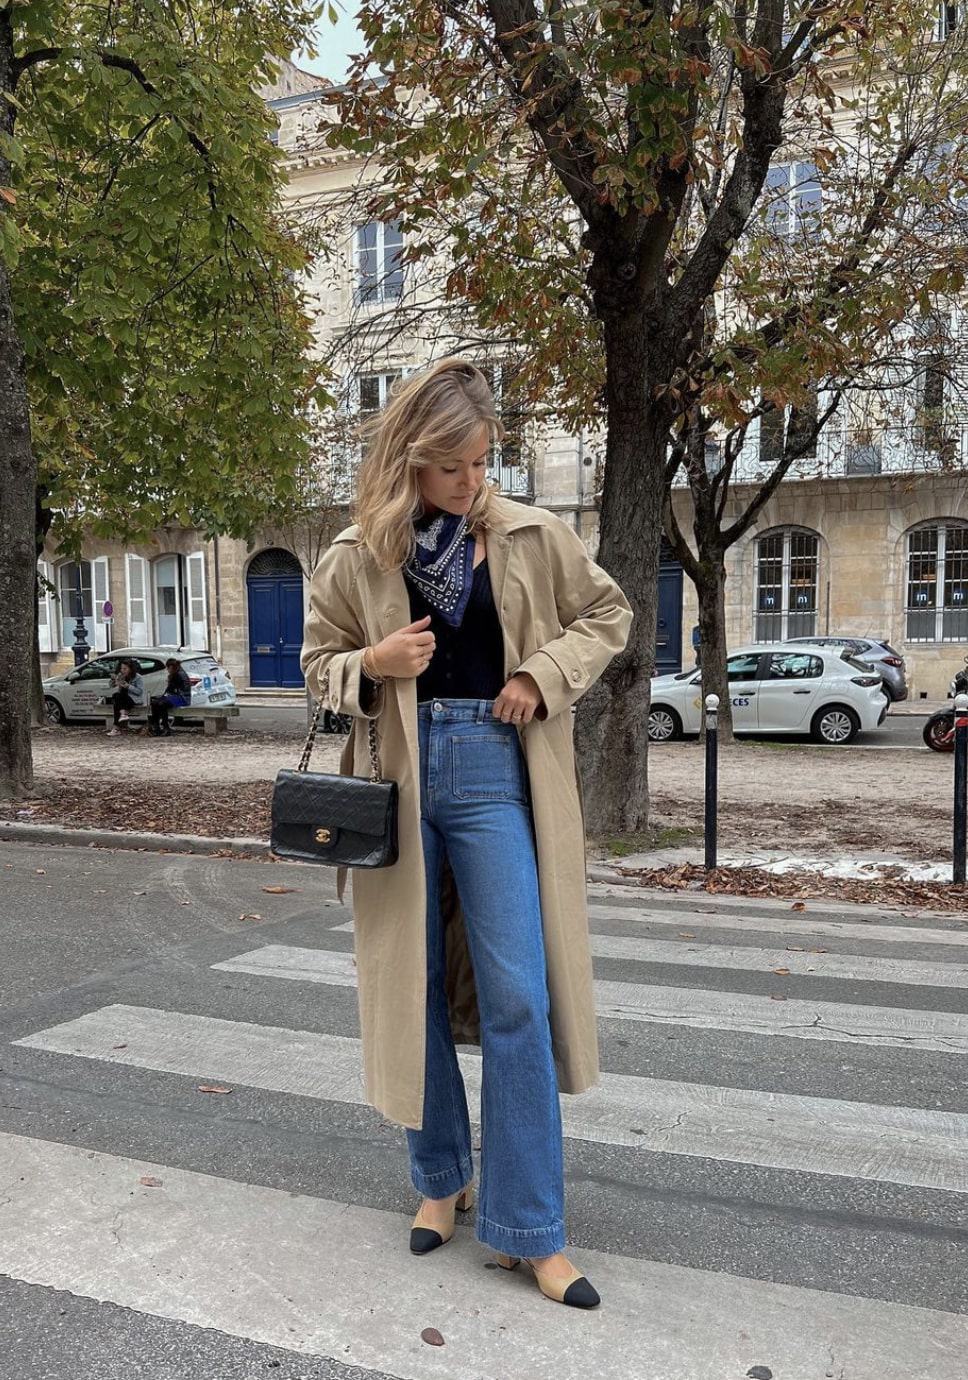 woman in Paris wearing a long trench coat with blue jeans and two-toned flats